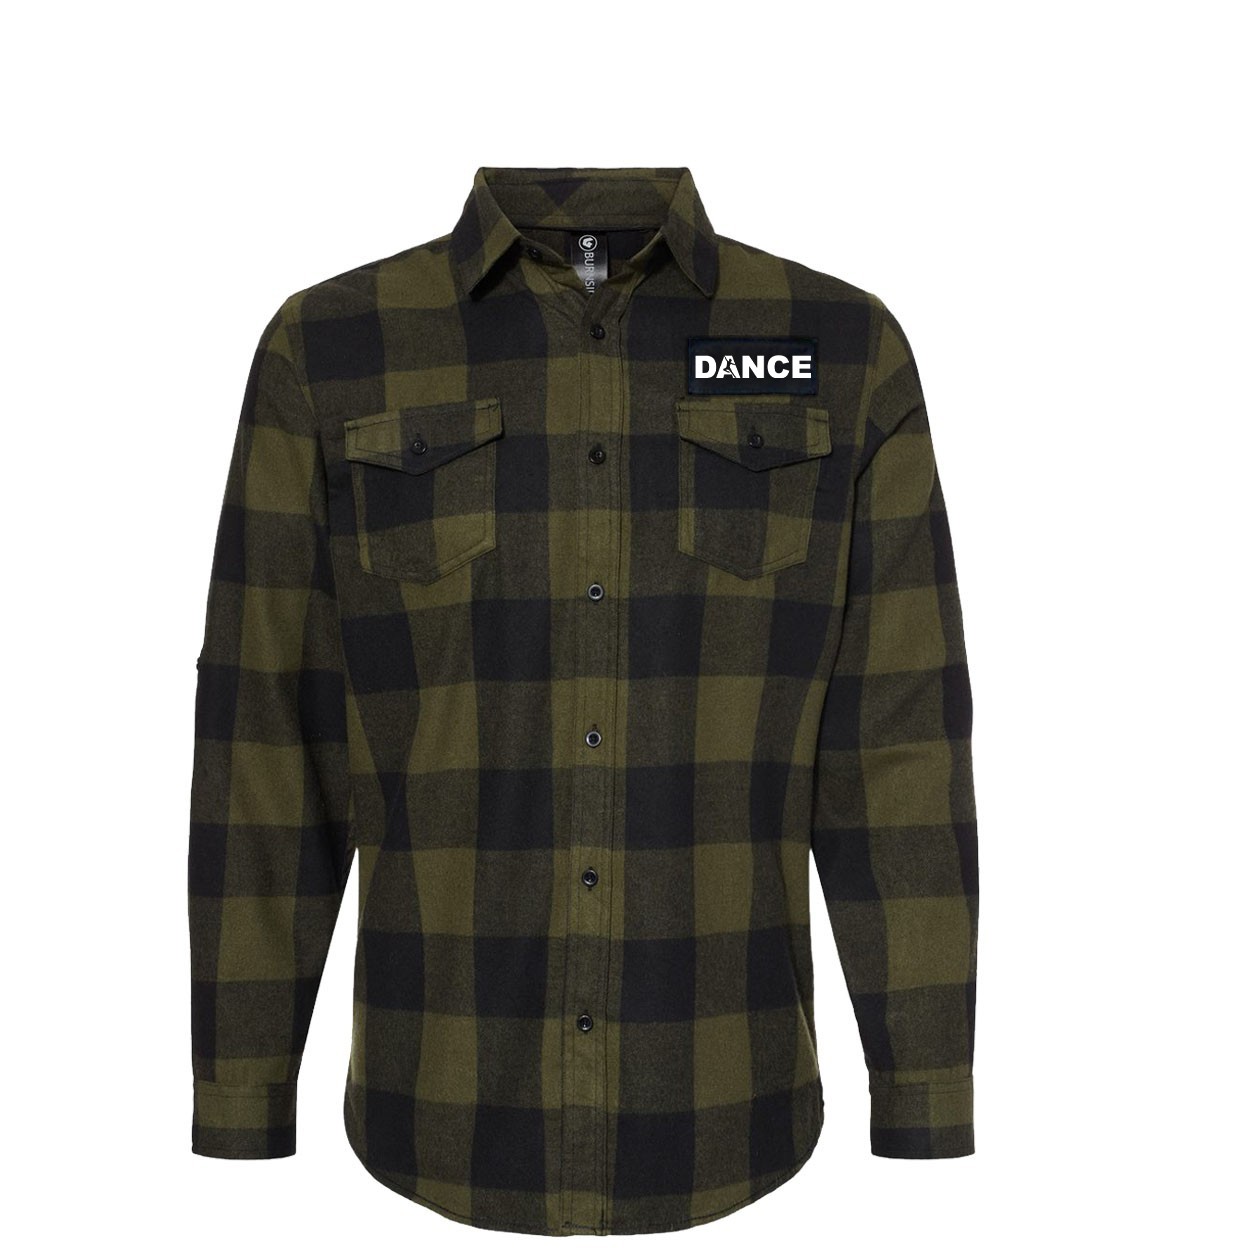 Dance Silhouette Logo Classic Unisex Long Sleeve Woven Patch Flannel Shirt Army/Black (White Logo)